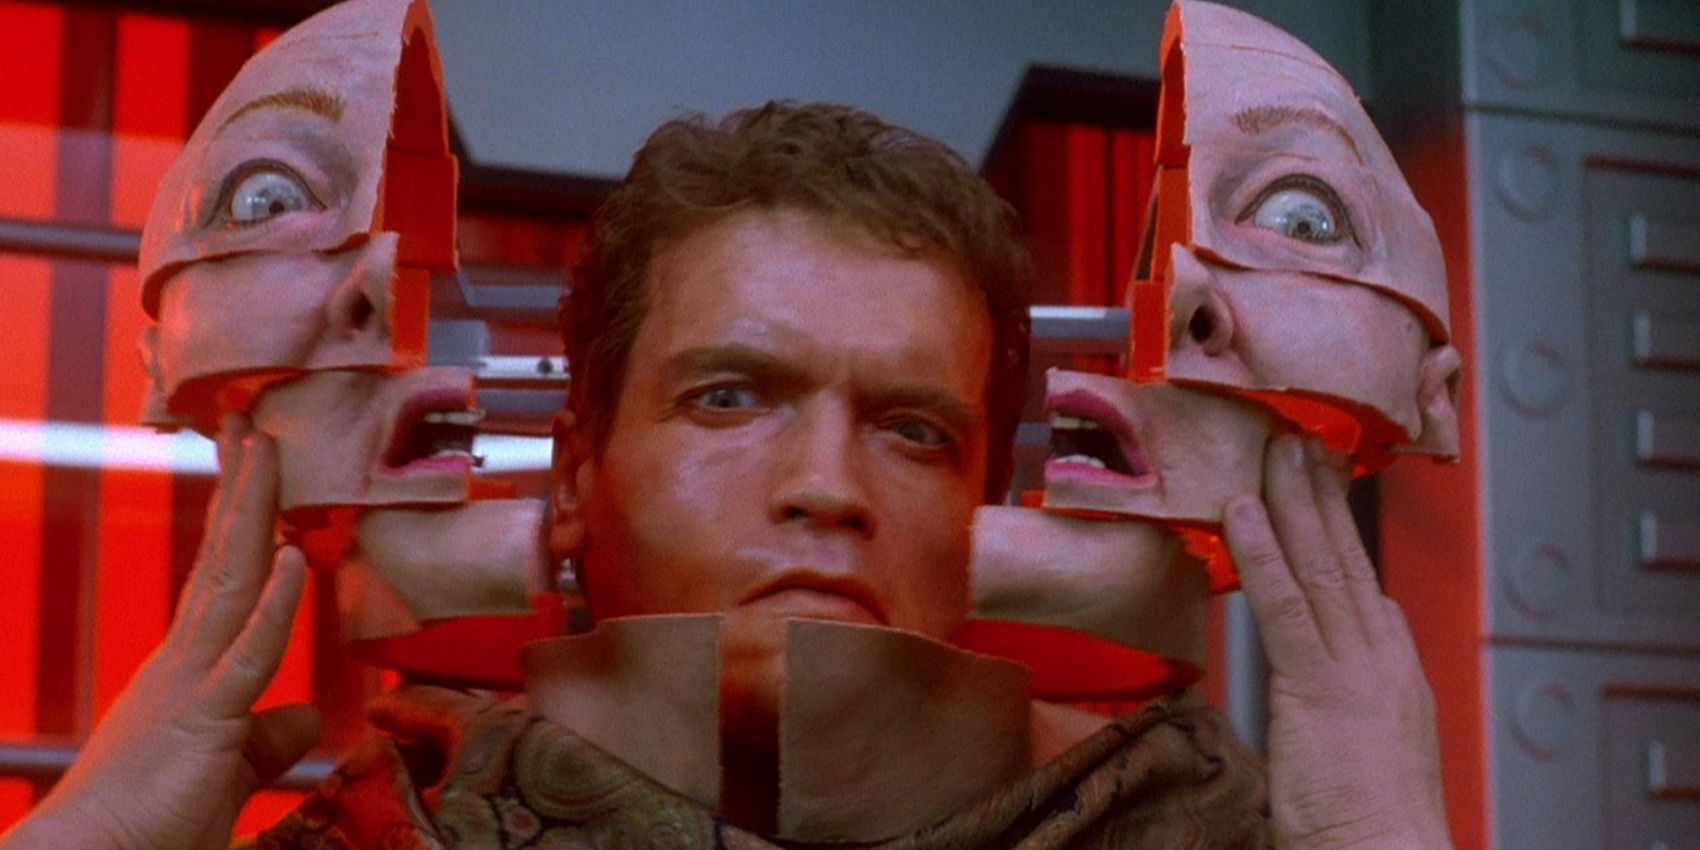 10 Best Movies and TV Shows Based On Philip K Dick Stories